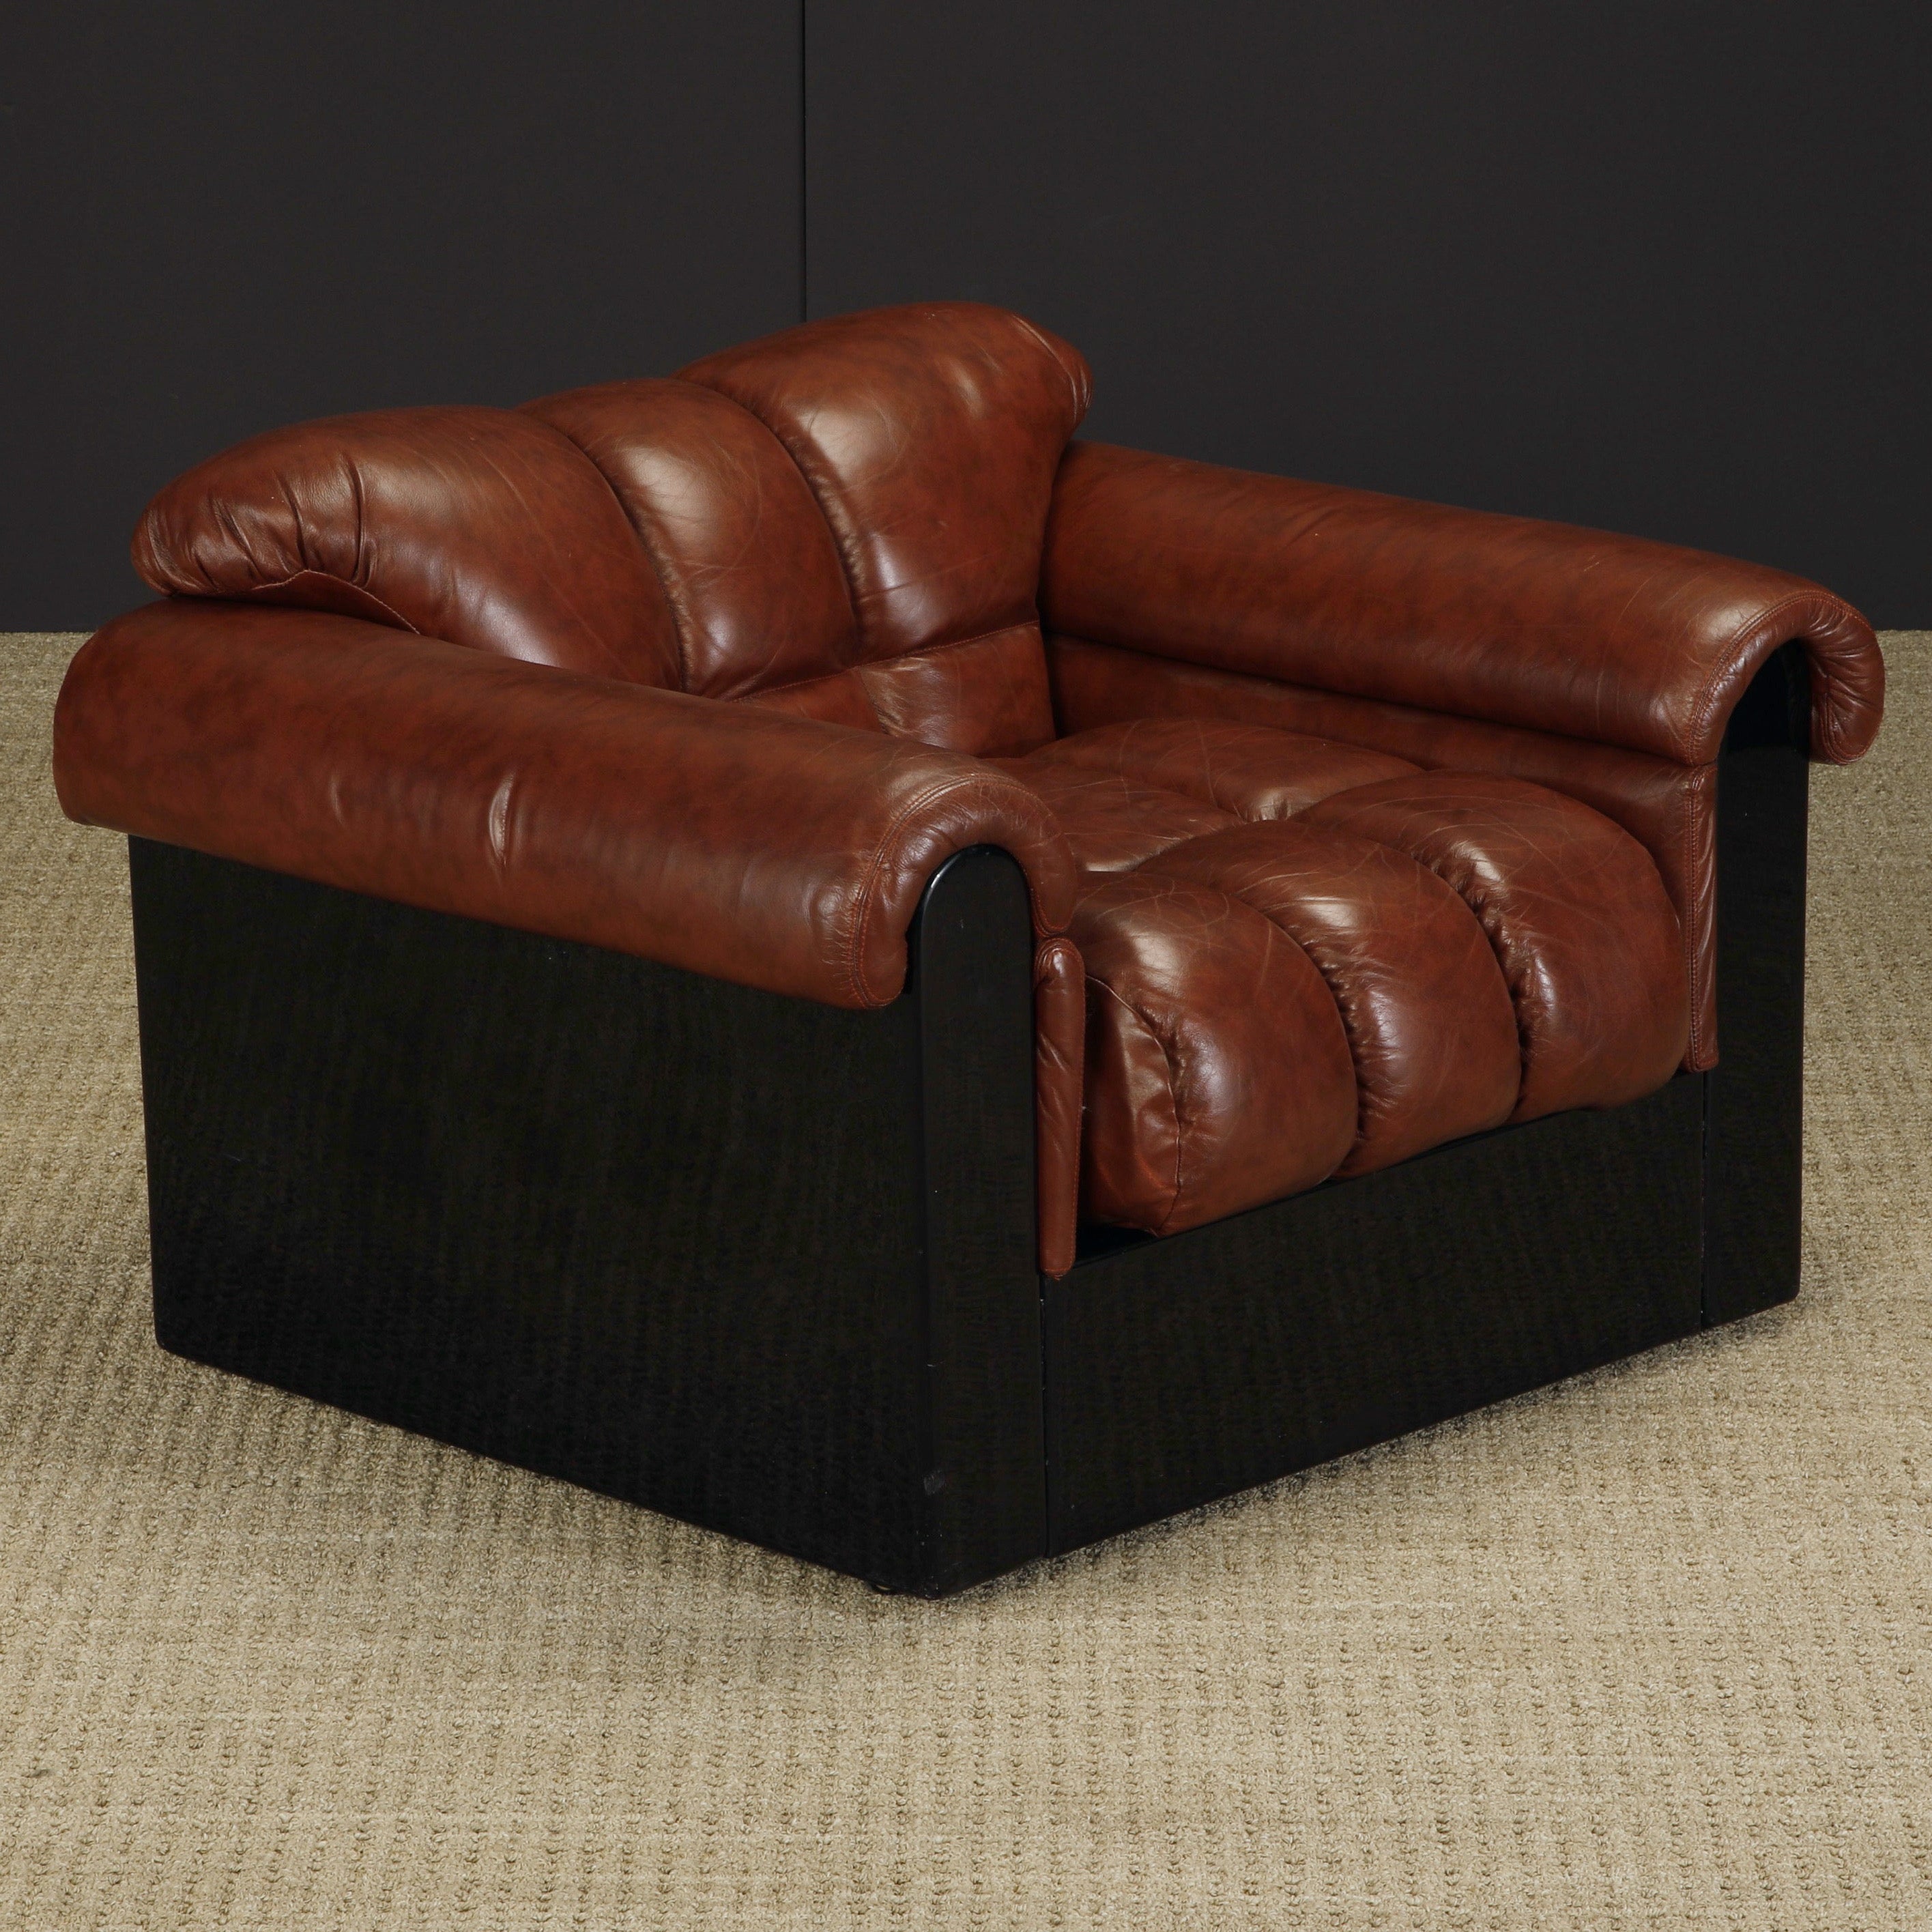 A lovely example of the 'Bounty' series club chair by The Pace Collection in the early 1980s, this deep seated channel-tufted leather lounge chair was designed by L. Davantazi produced by Elam and retailed by The Pace Collection. Perfect for a